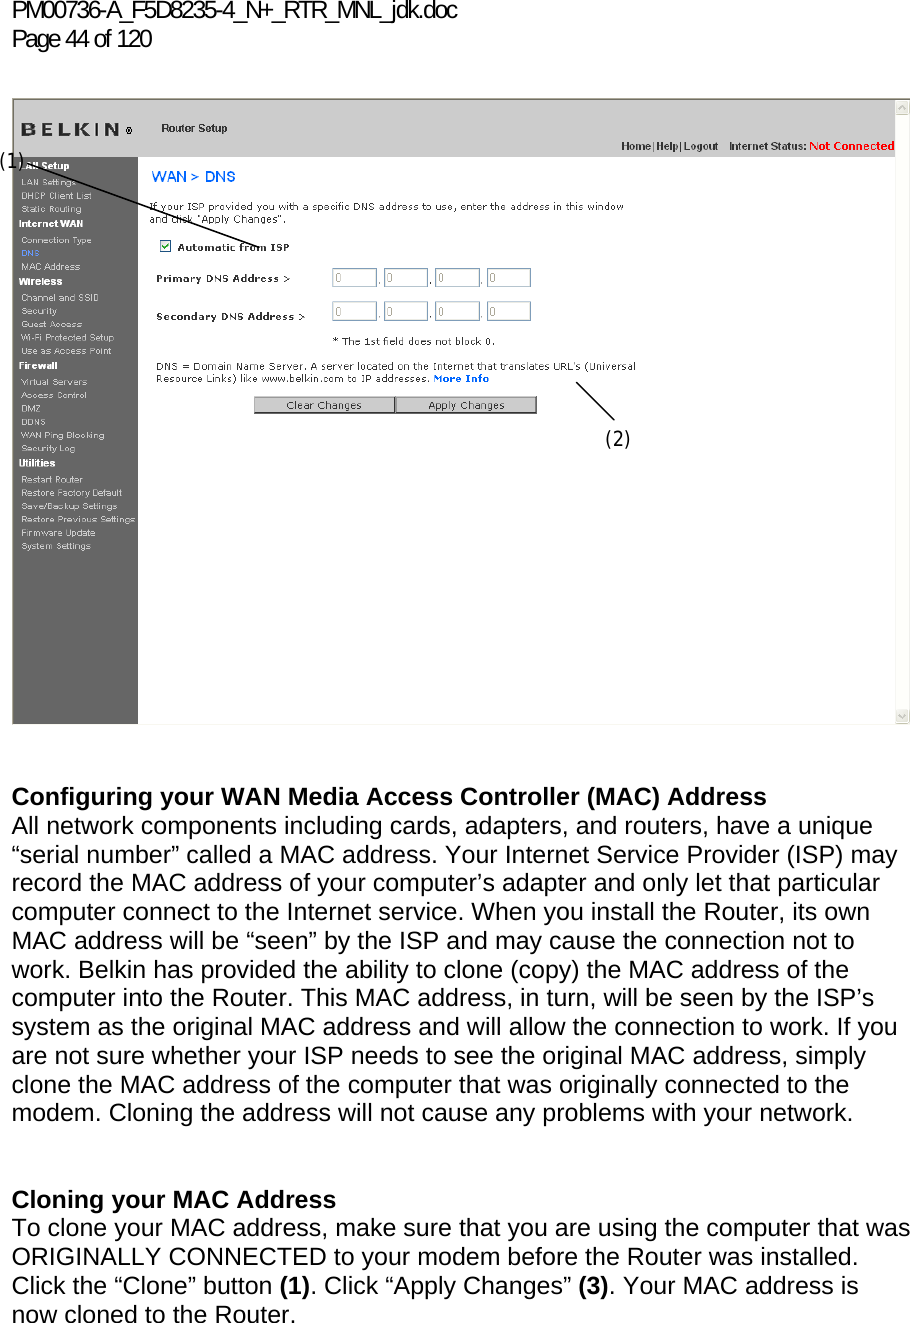 PM00736-A_F5D8235-4_N+_RTR_MNL_jdk.doc Page 44 of 120     Configuring your WAN Media Access Controller (MAC) Address  All network components including cards, adapters, and routers, have a unique “serial number” called a MAC address. Your Internet Service Provider (ISP) may record the MAC address of your computer’s adapter and only let that particular computer connect to the Internet service. When you install the Router, its own MAC address will be “seen” by the ISP and may cause the connection not to work. Belkin has provided the ability to clone (copy) the MAC address of the computer into the Router. This MAC address, in turn, will be seen by the ISP’s system as the original MAC address and will allow the connection to work. If you are not sure whether your ISP needs to see the original MAC address, simply clone the MAC address of the computer that was originally connected to the modem. Cloning the address will not cause any problems with your network.   Cloning your MAC Address  To clone your MAC address, make sure that you are using the computer that was ORIGINALLY CONNECTED to your modem before the Router was installed. Click the “Clone” button (1). Click “Apply Changes” (3). Your MAC address is now cloned to the Router.  (1) (2) 